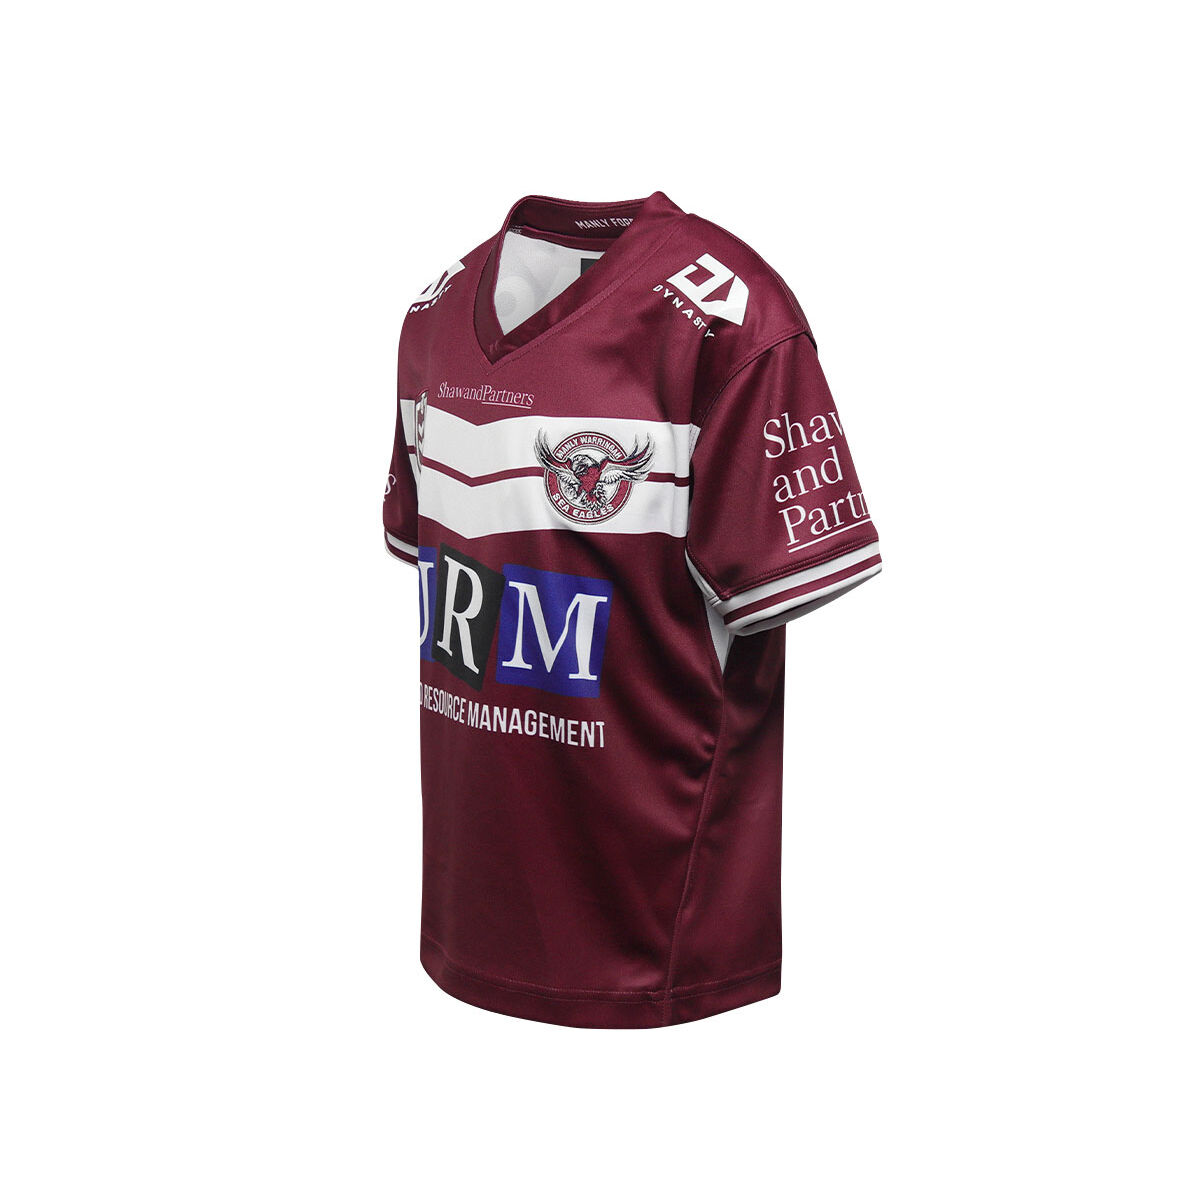 NRL MANLY SEA-EAGLES T-shirt Kids size 12c  w/tag NEW! 